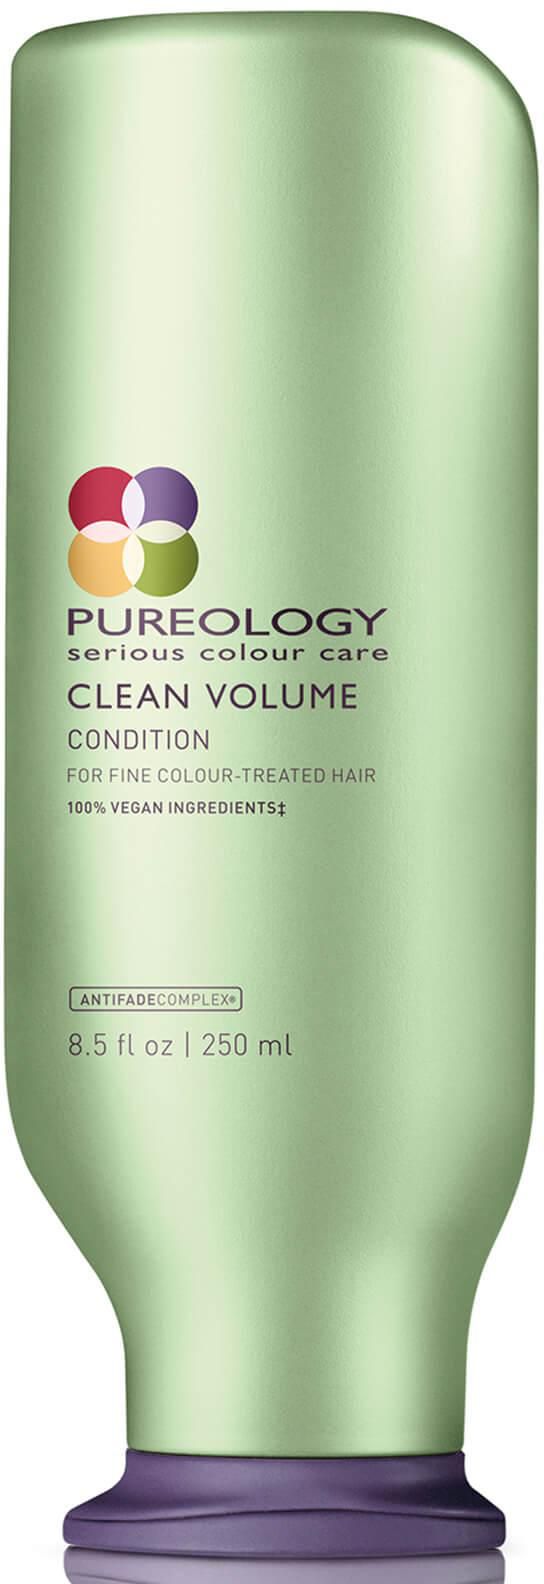 Pureology Clean Volume Colour Care Conditioner 250ml